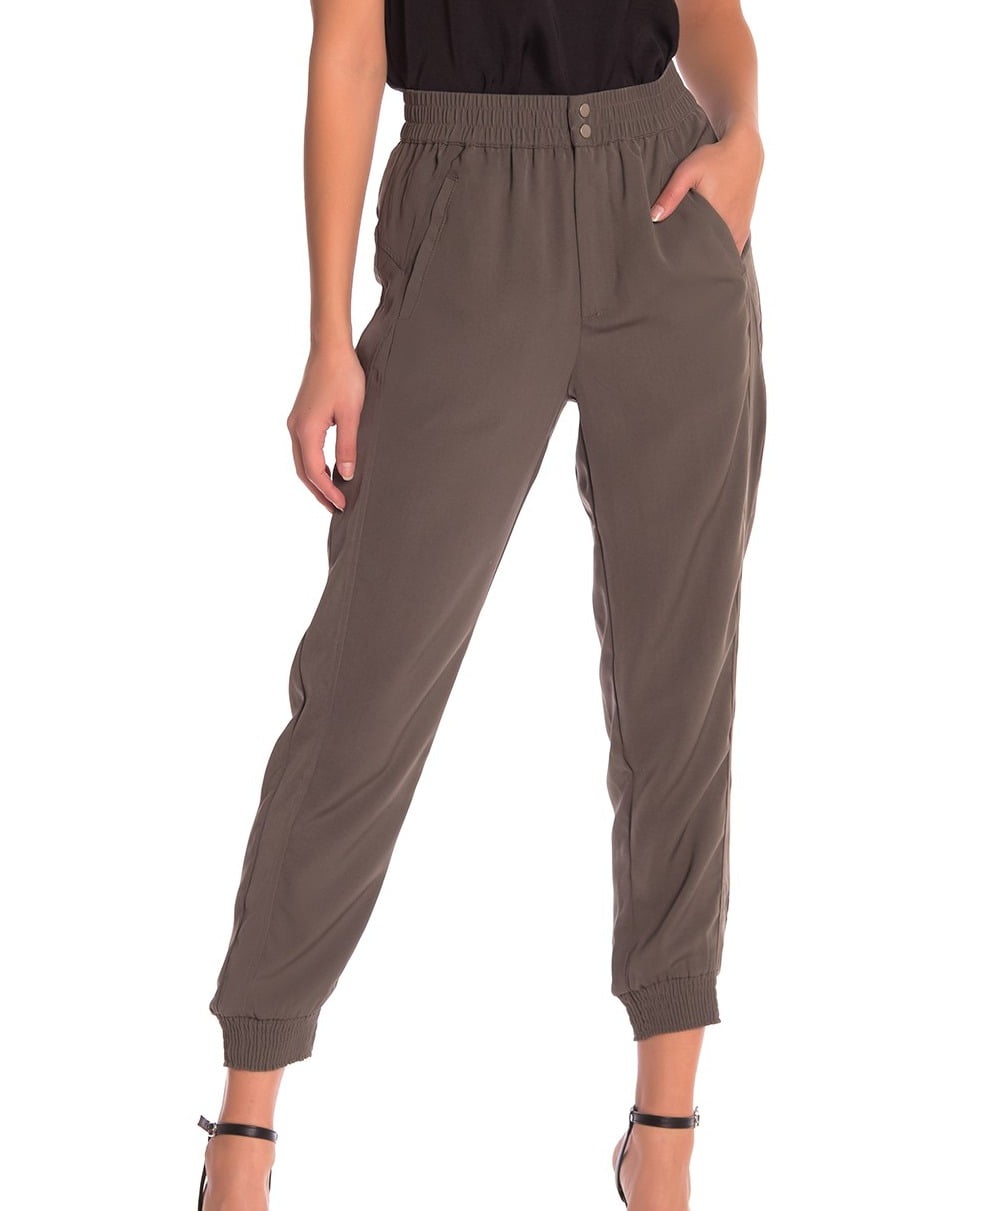 Elodie - Womens Pants Olive Large High Waist Woven Jogger L - Walmart ...